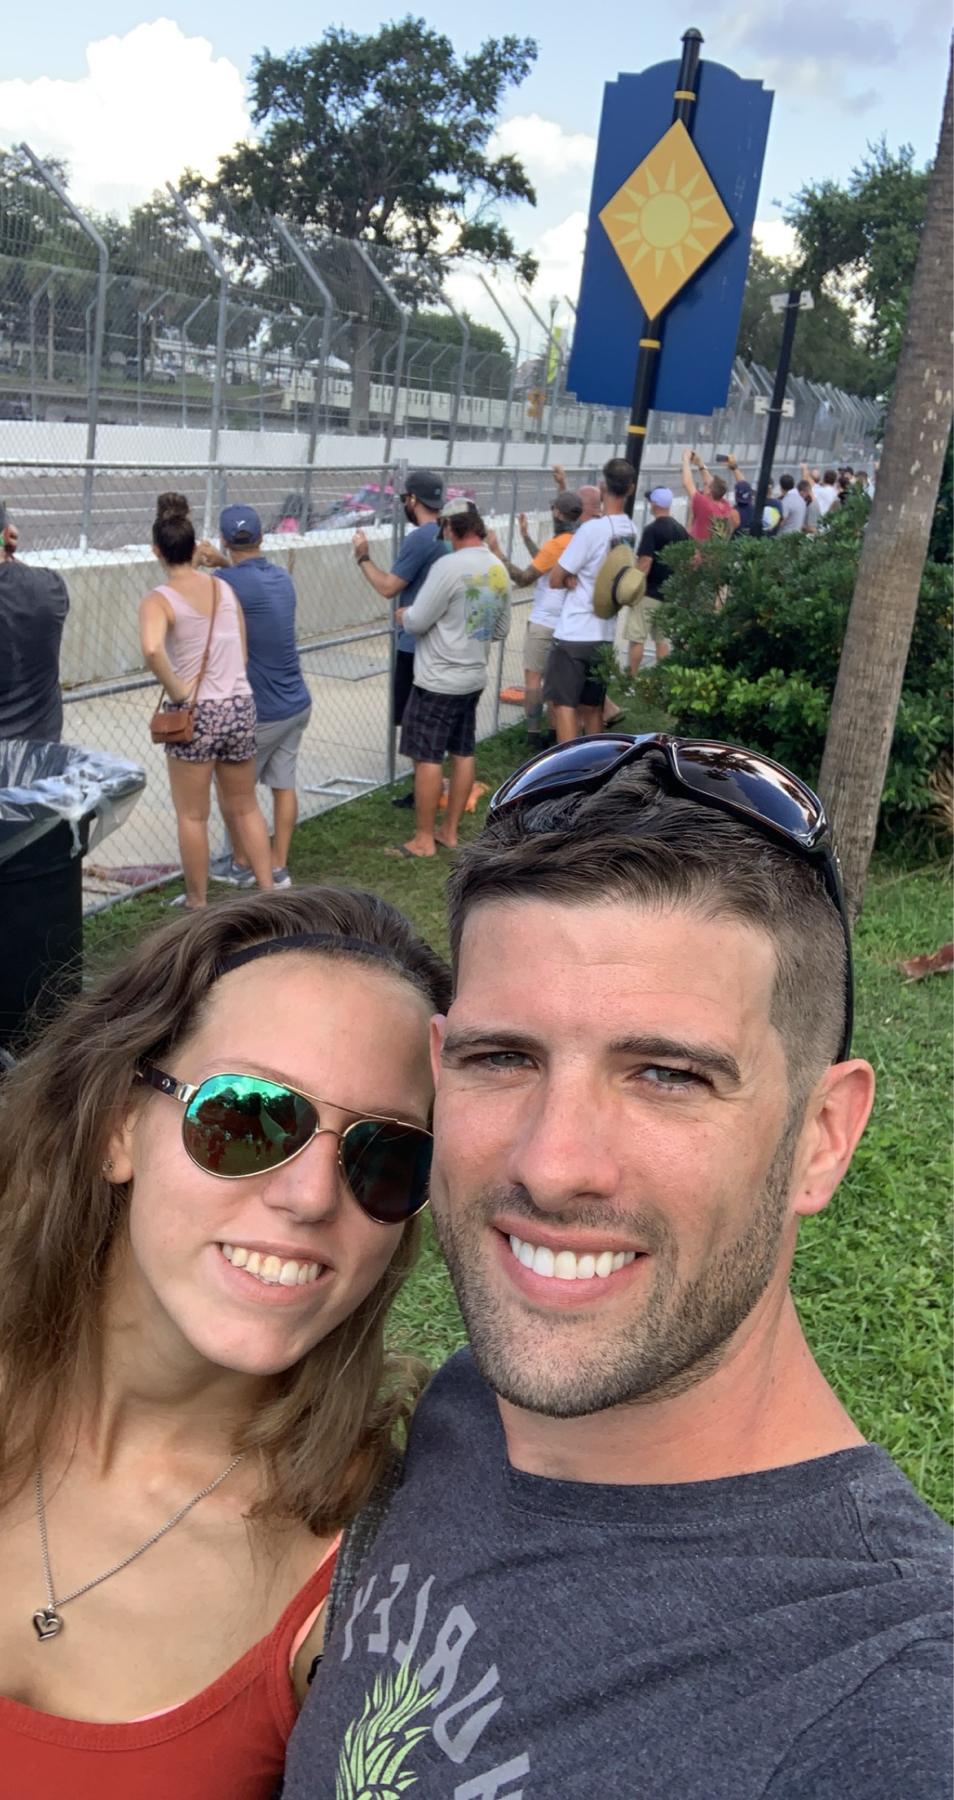 Julia grew up going to the Grand Prix races yearly with her dad. Now she gets to go with Austin, who also loves ‘Go Fast’ just as much as she does!